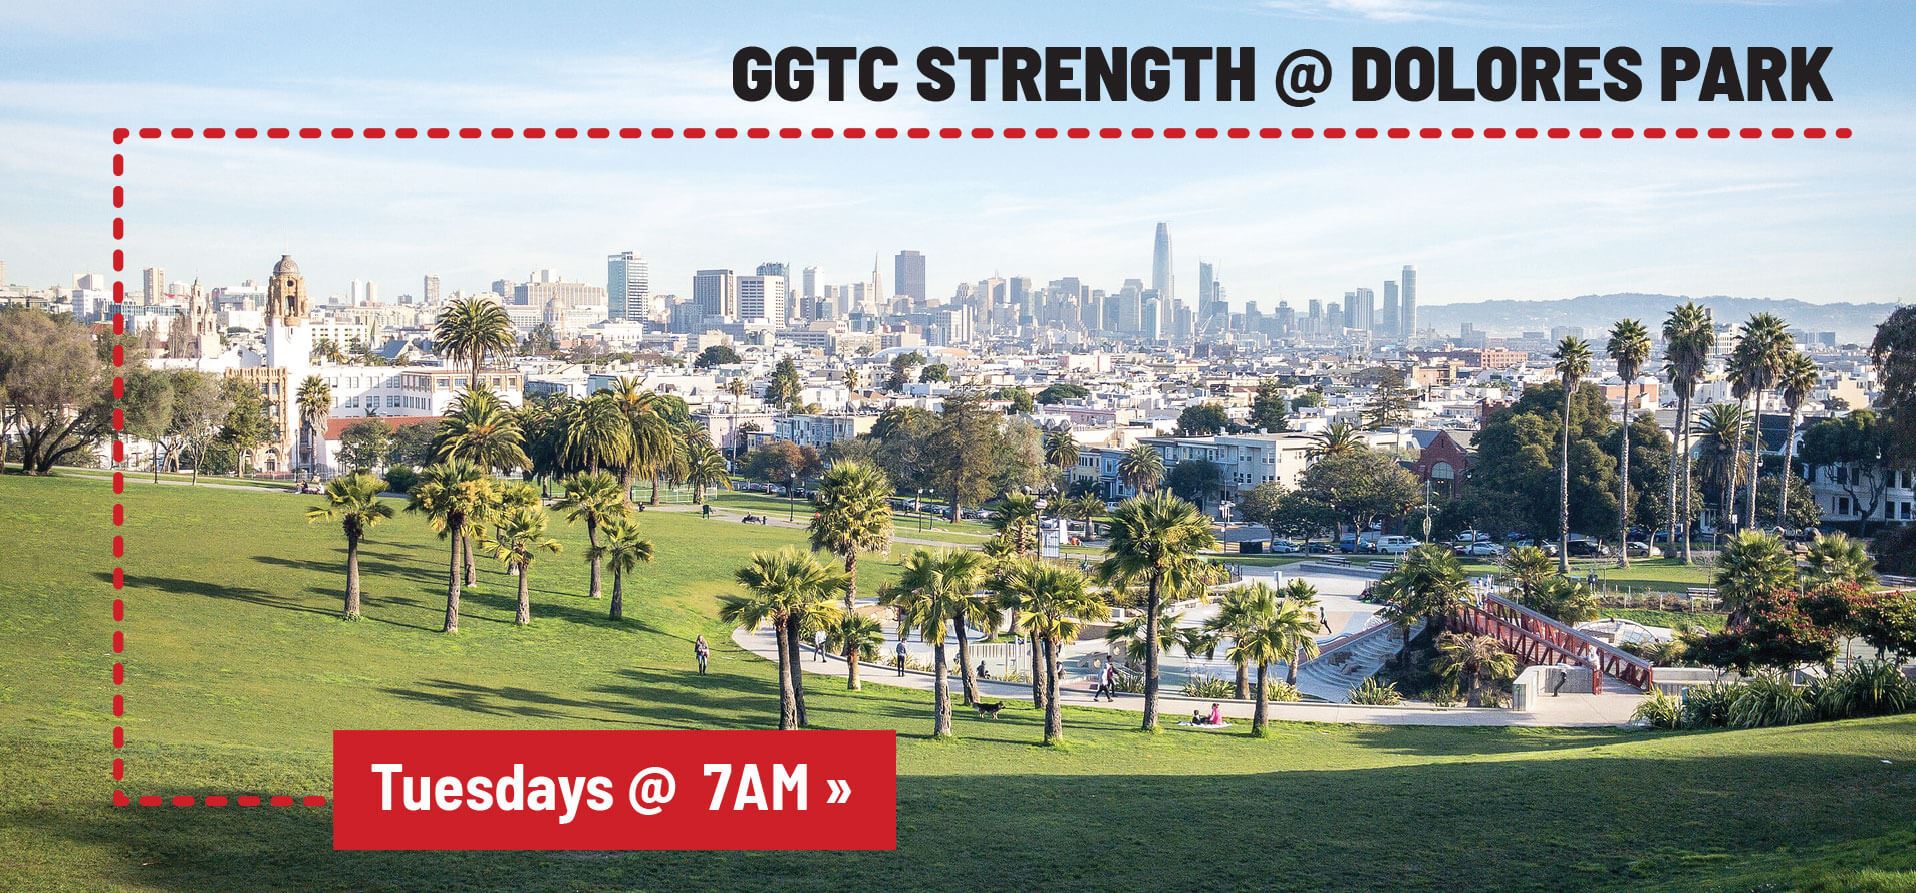 Group strength workouts at Dolores Park